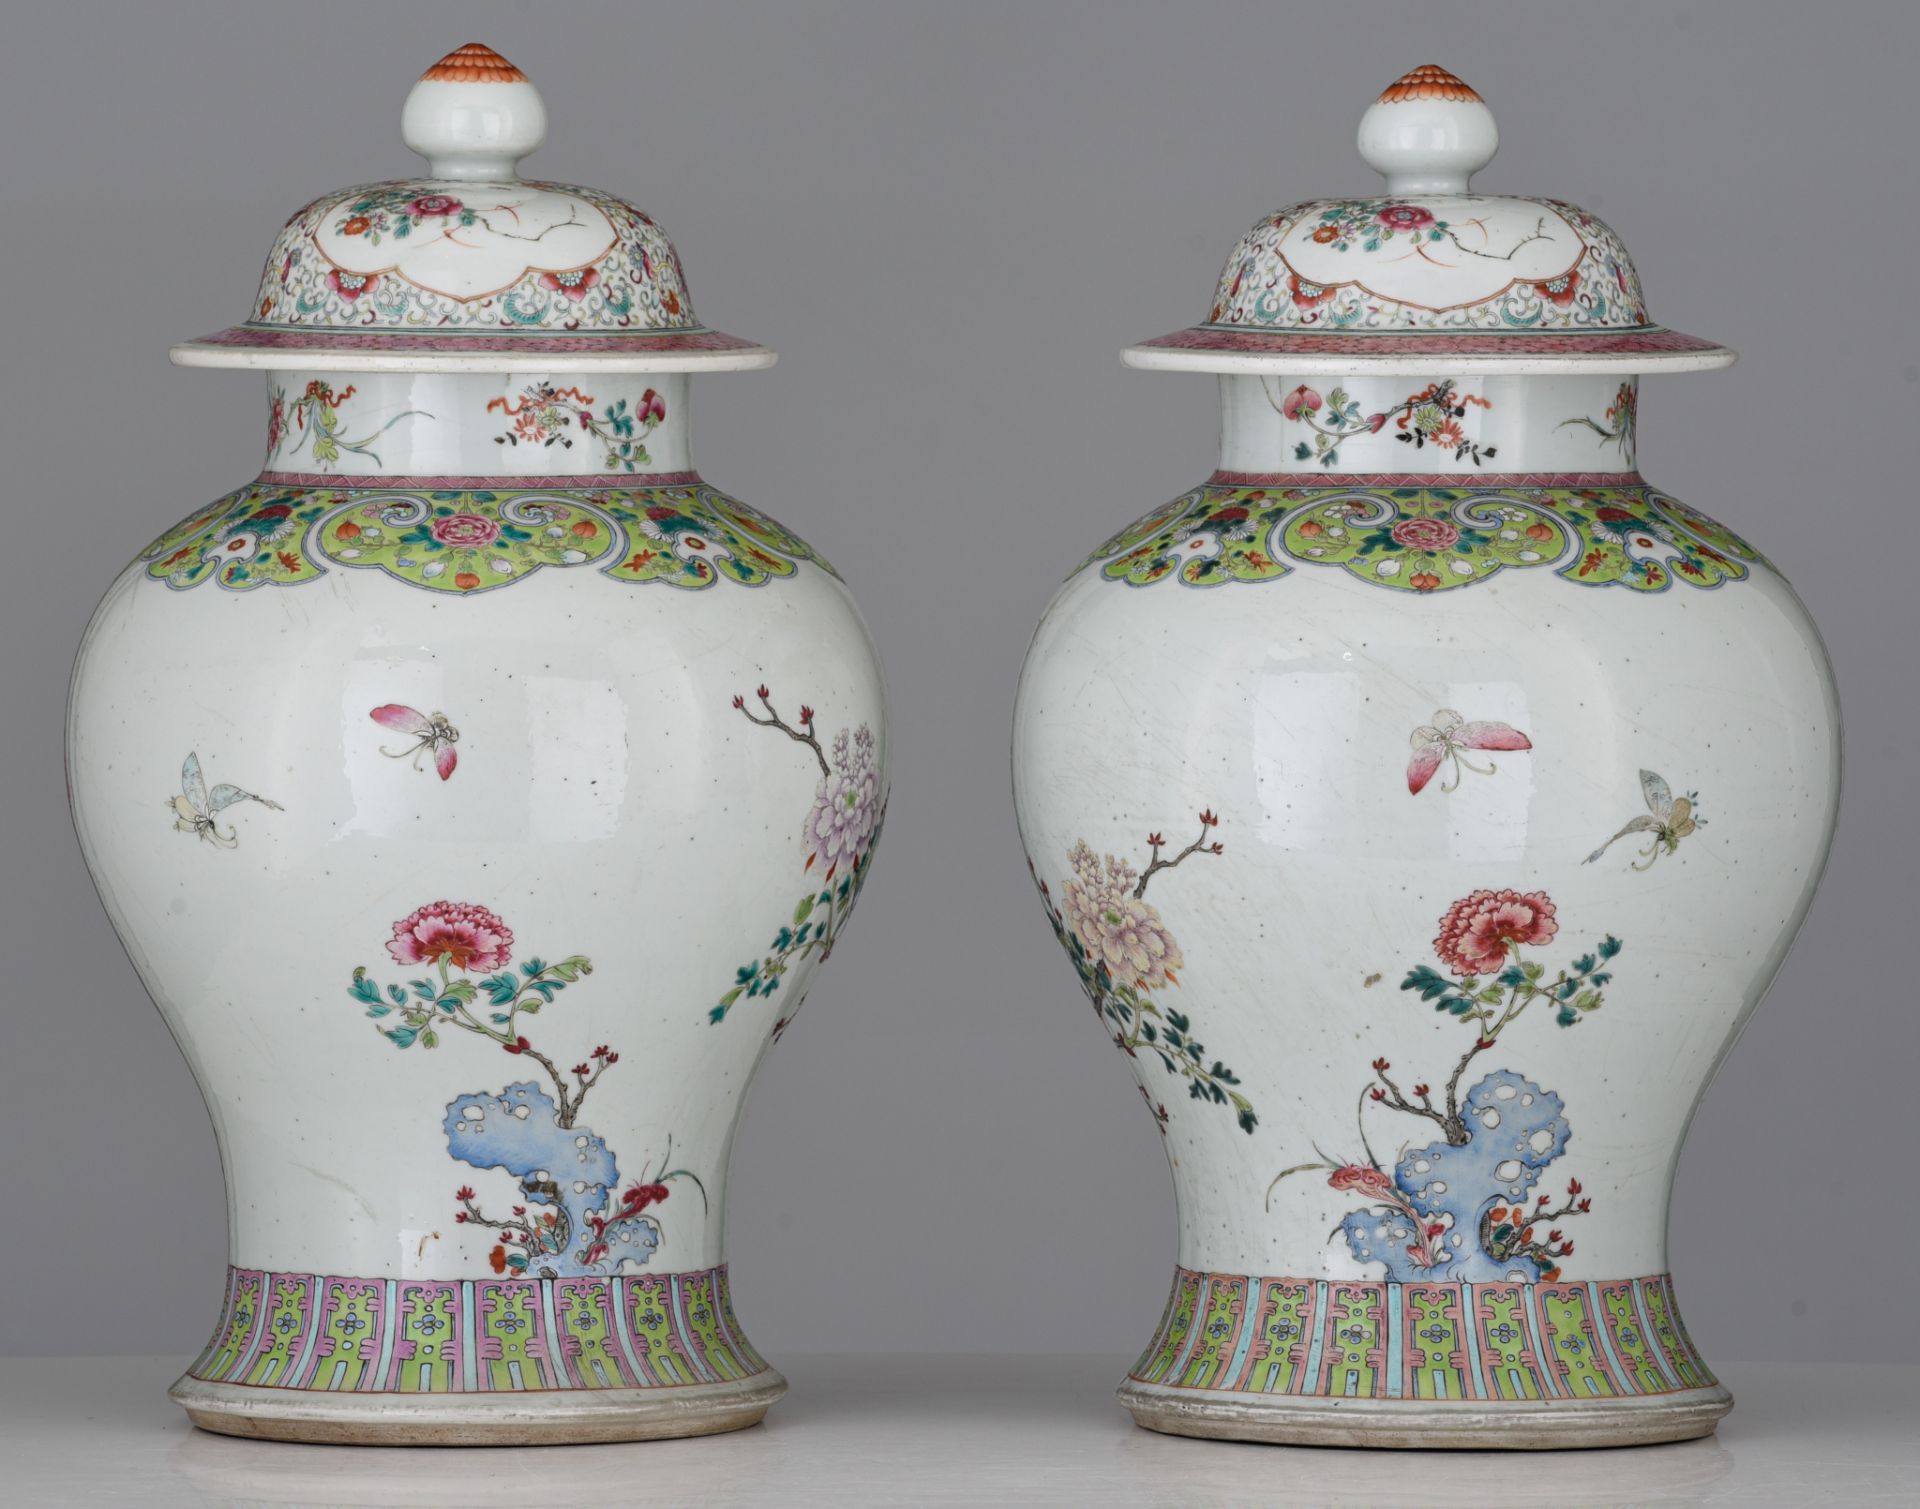 A fine pair of Chinese famille rose 'Phoenix' covered vases, 19thC, H 44,5 cm - Image 4 of 7